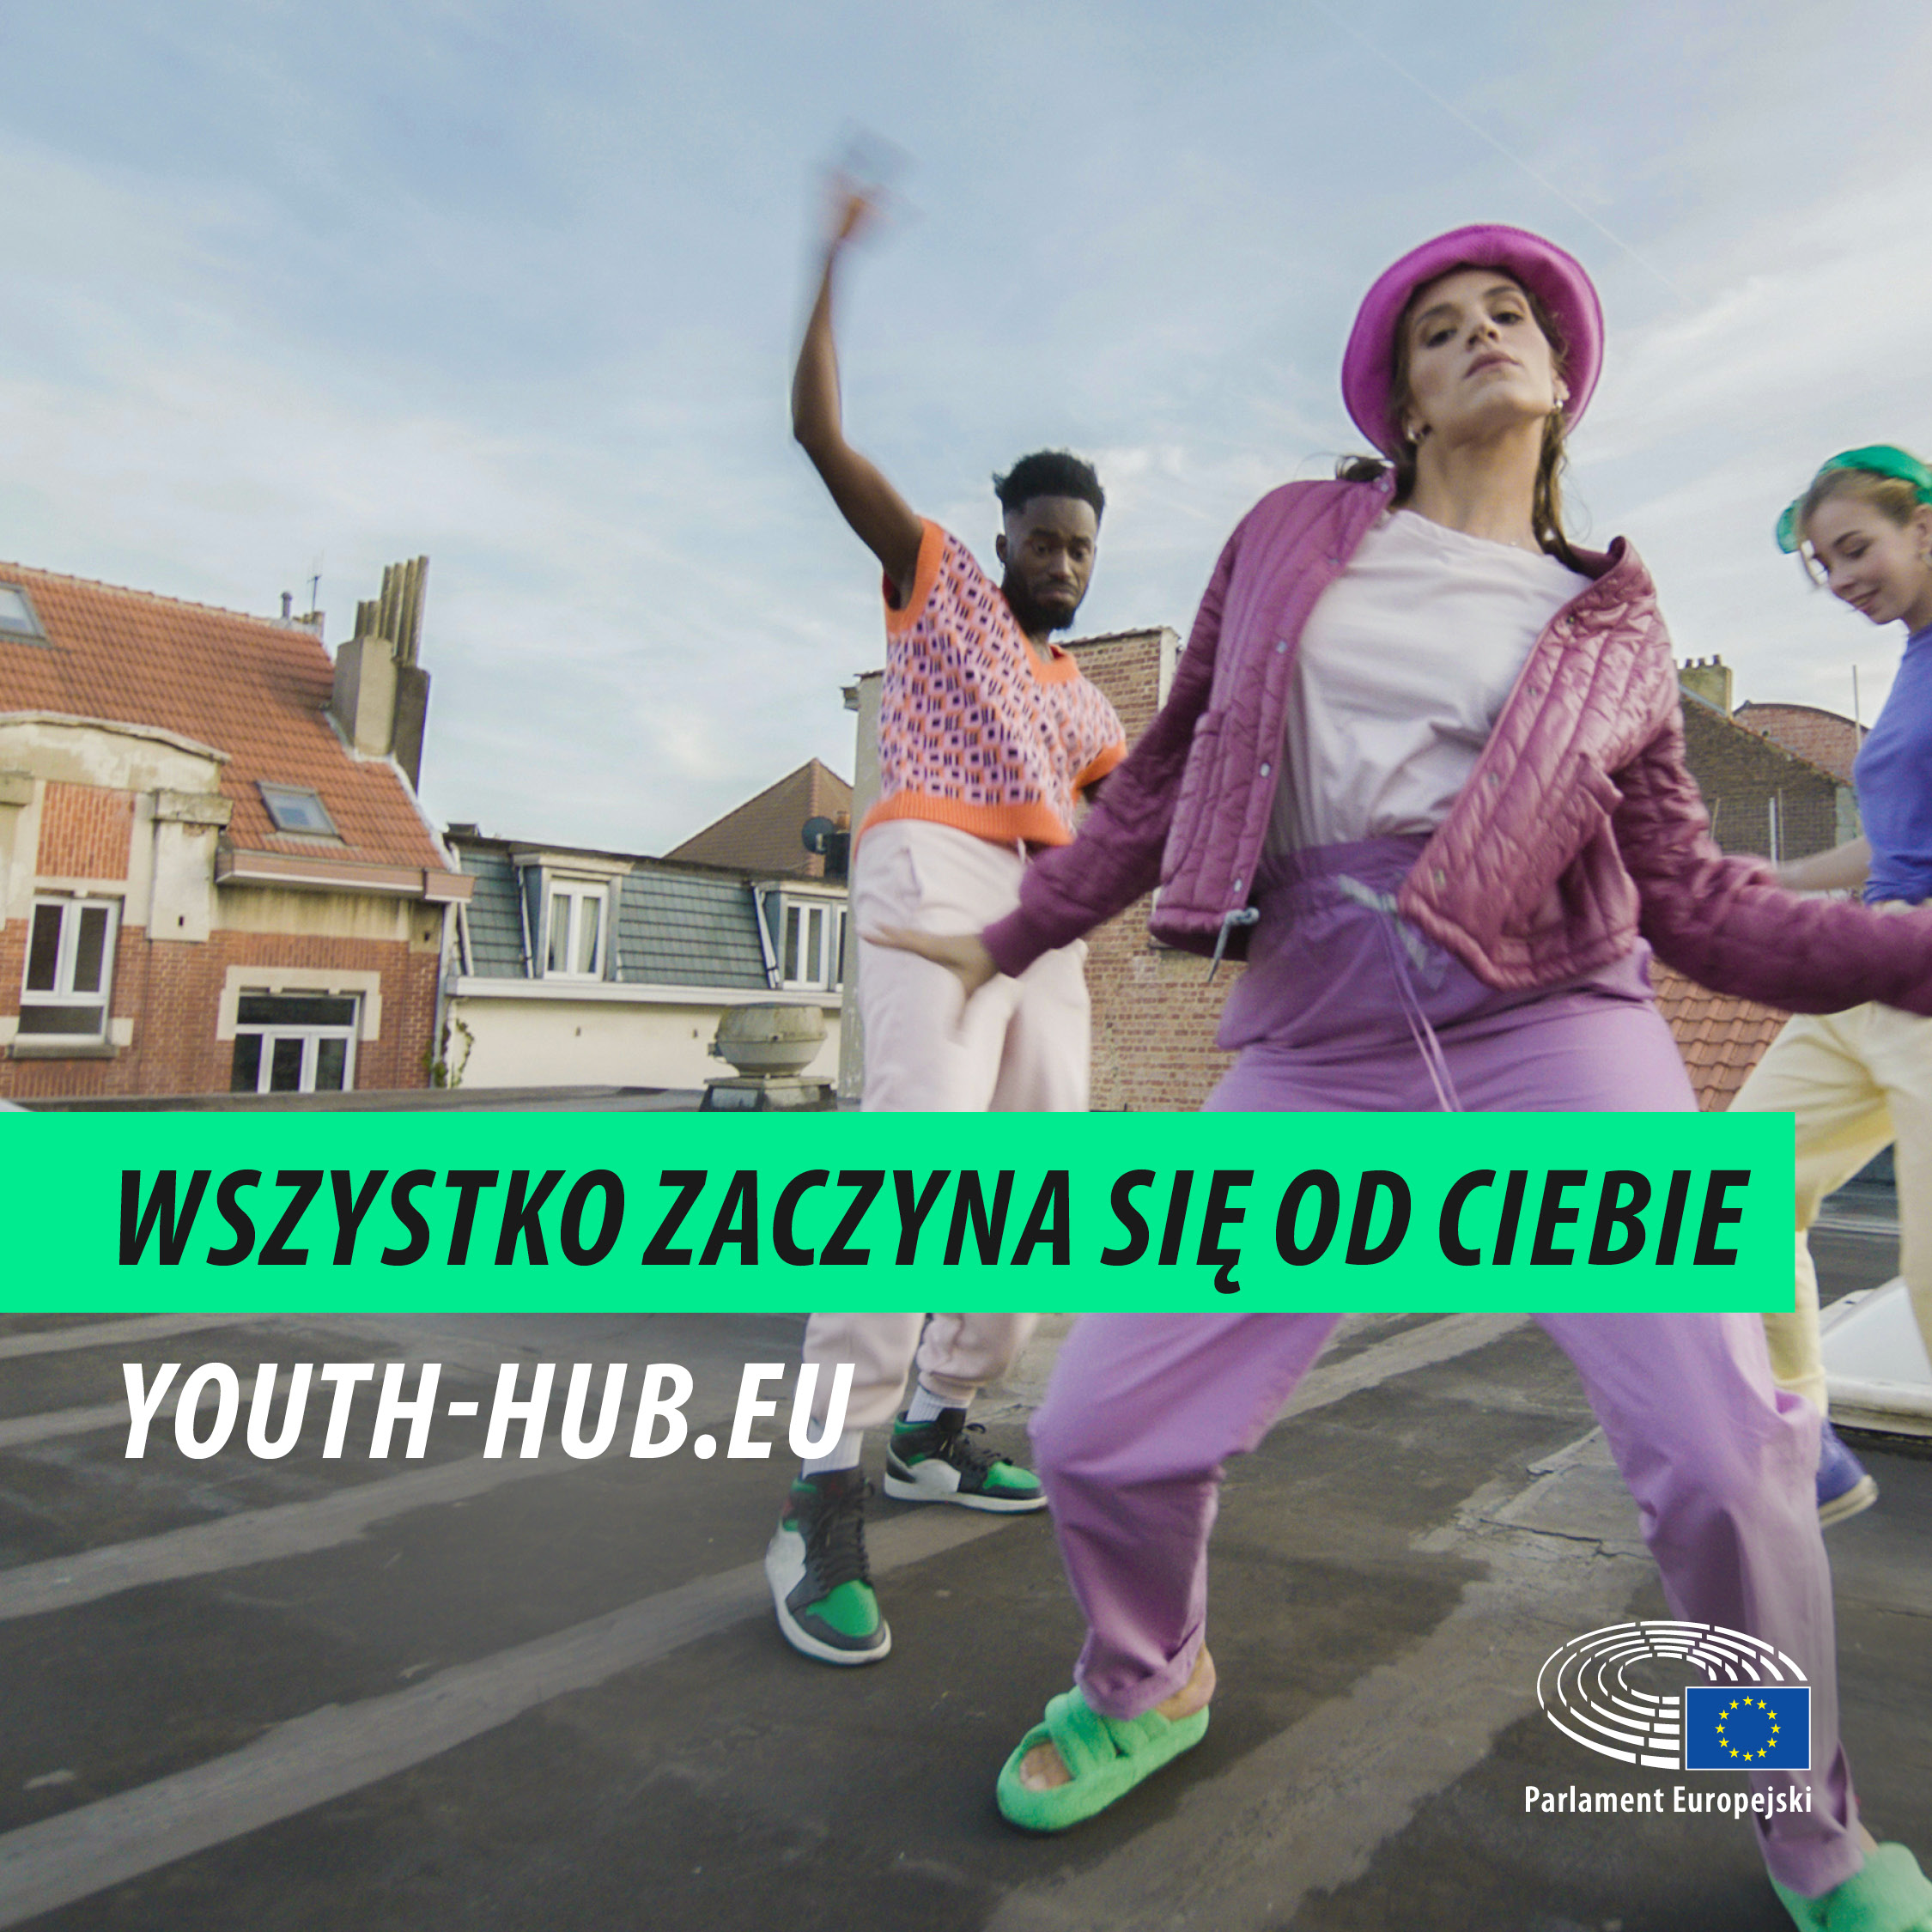 Youth Hub promotional pic 1080x1080 PL